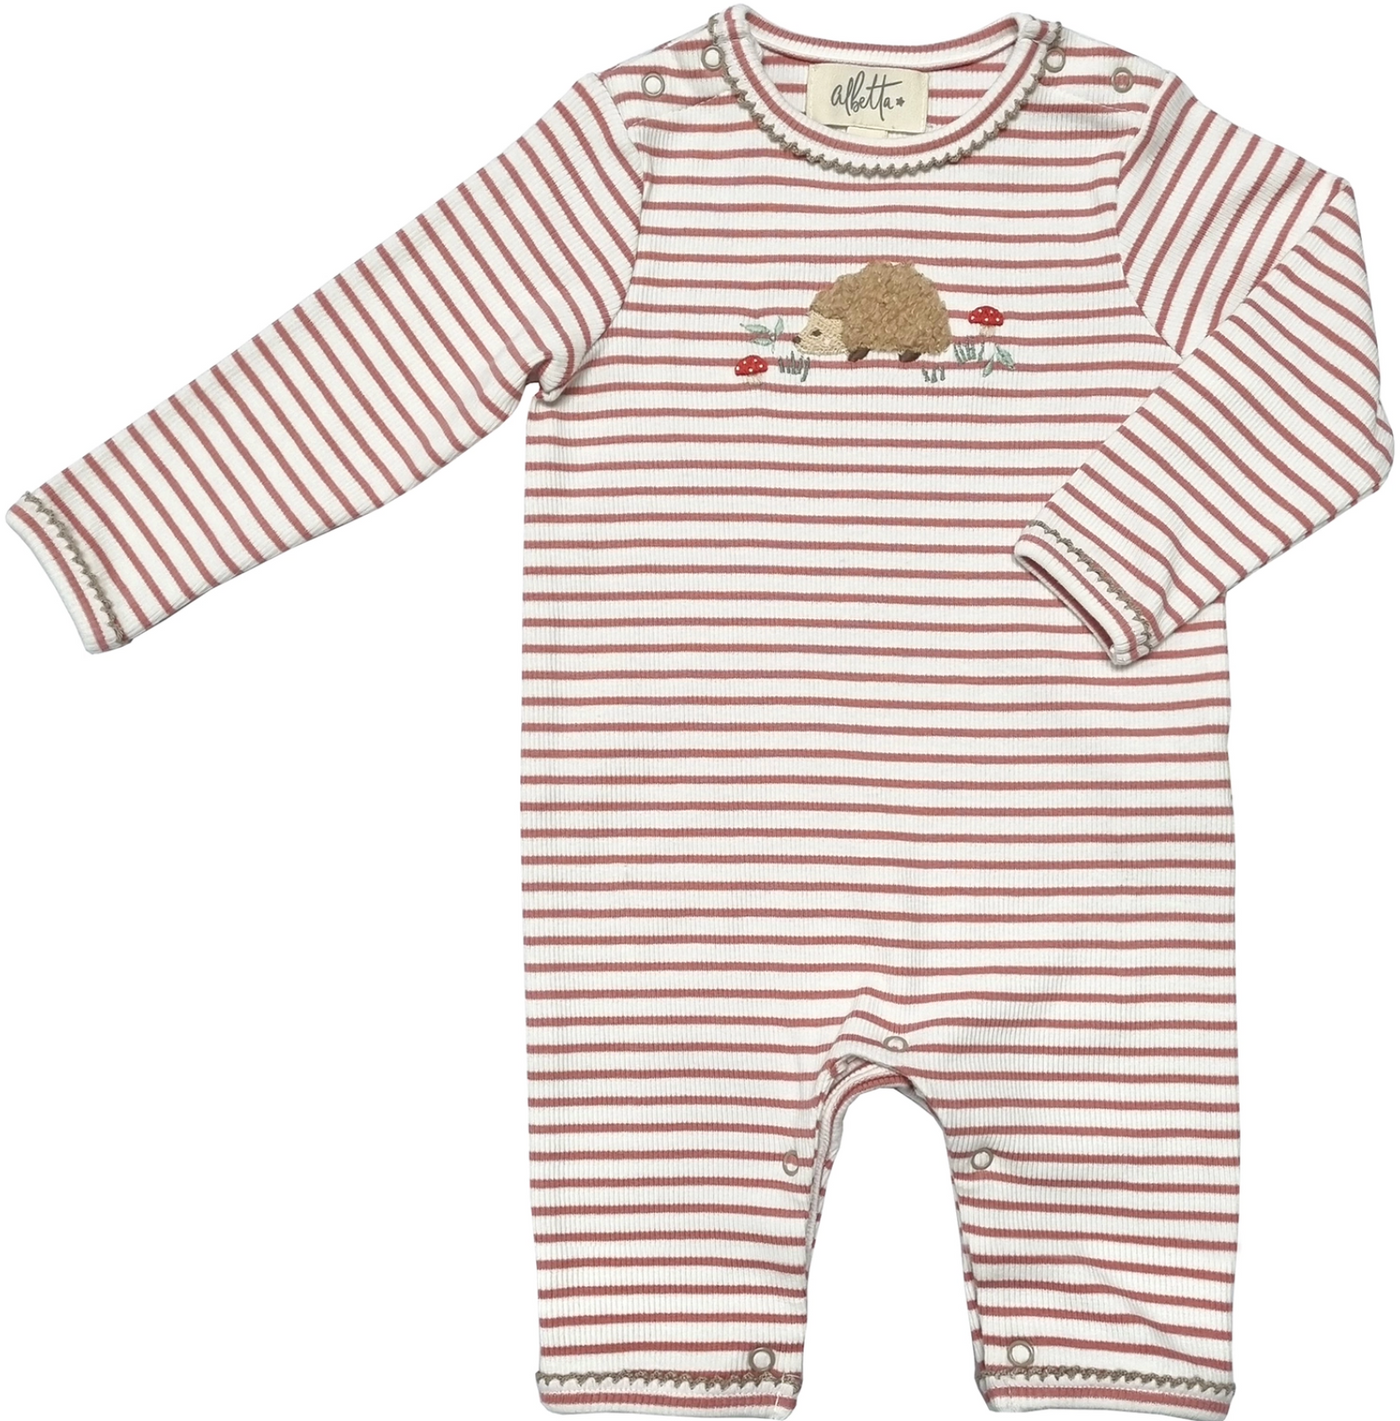 BABYGRO APPLIQUE HEDGEHOG (Available in 2 Sizes)